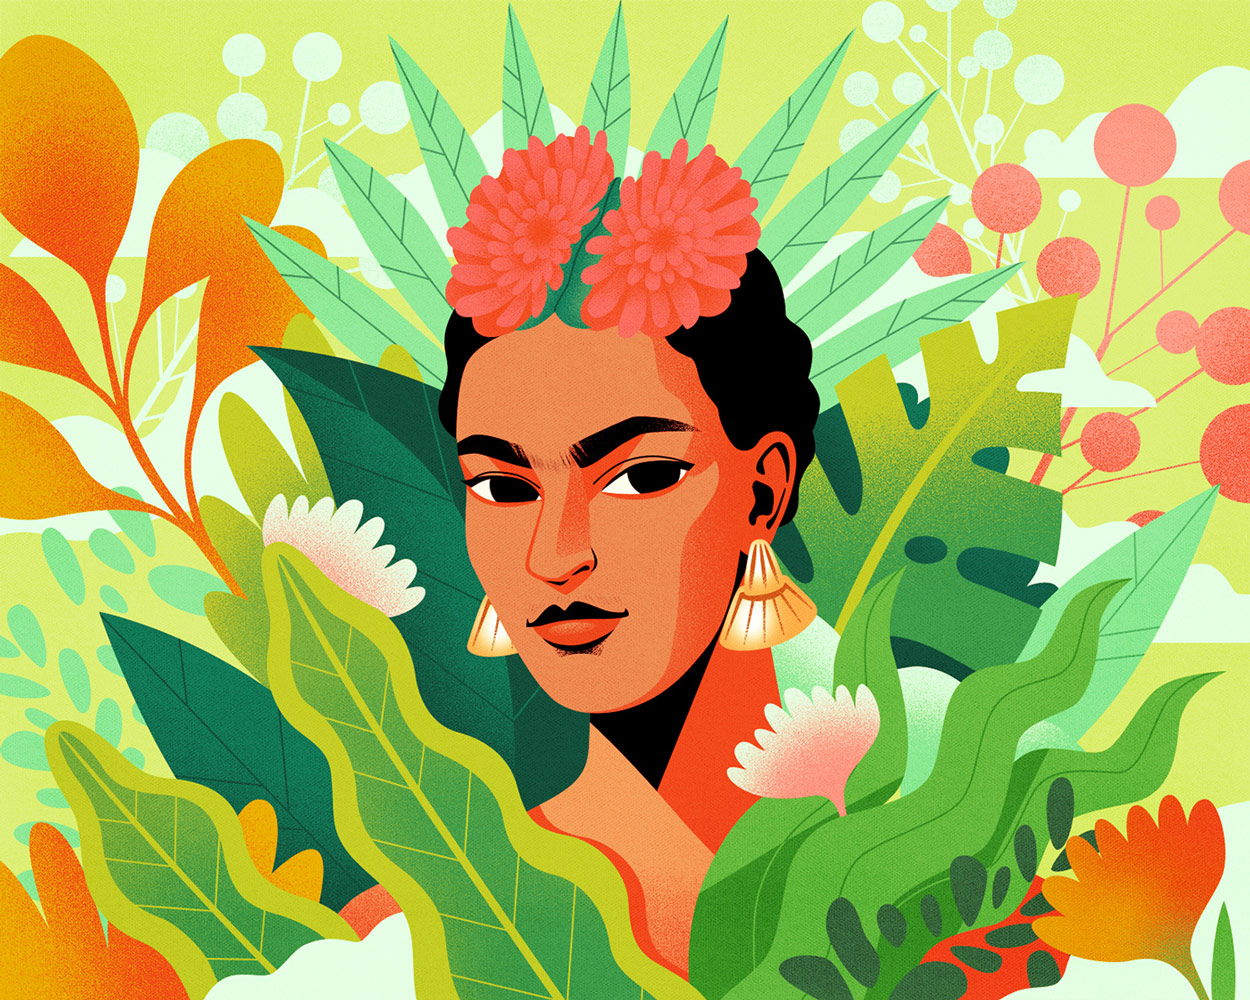 'Portrait of Frida Kahlo surrounded by plants and flowers